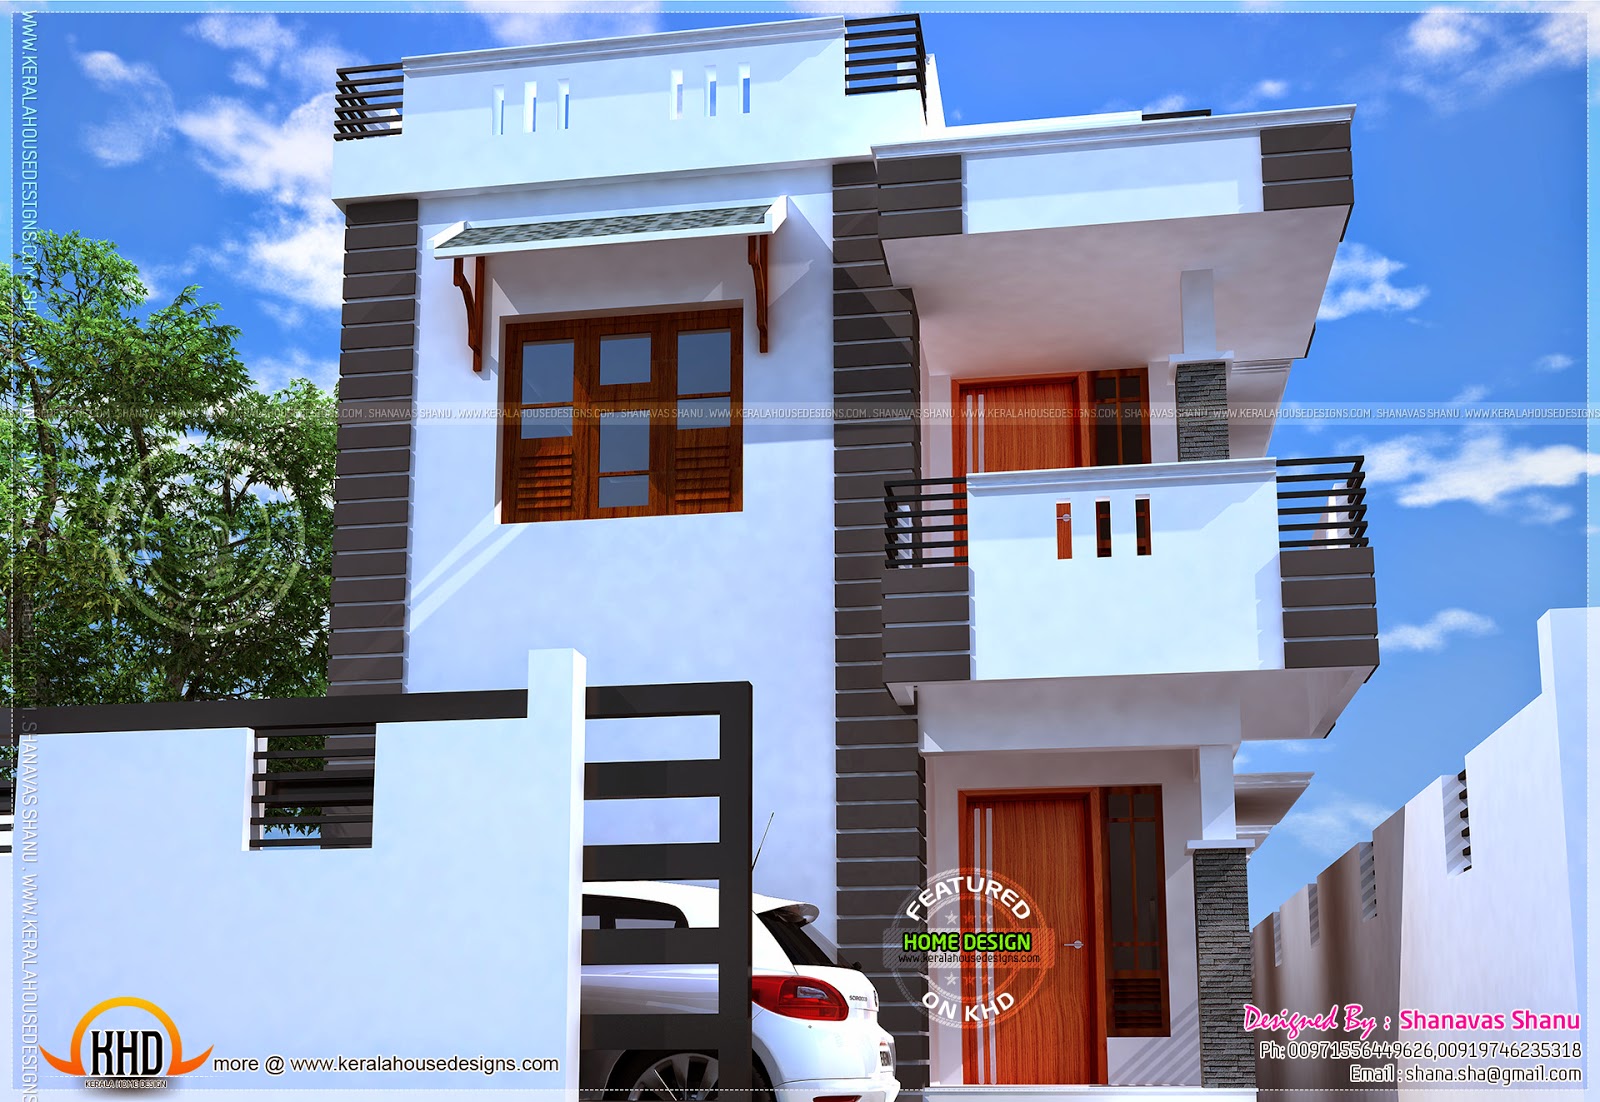  Small  villa with floor plans  Home  Kerala Plans 